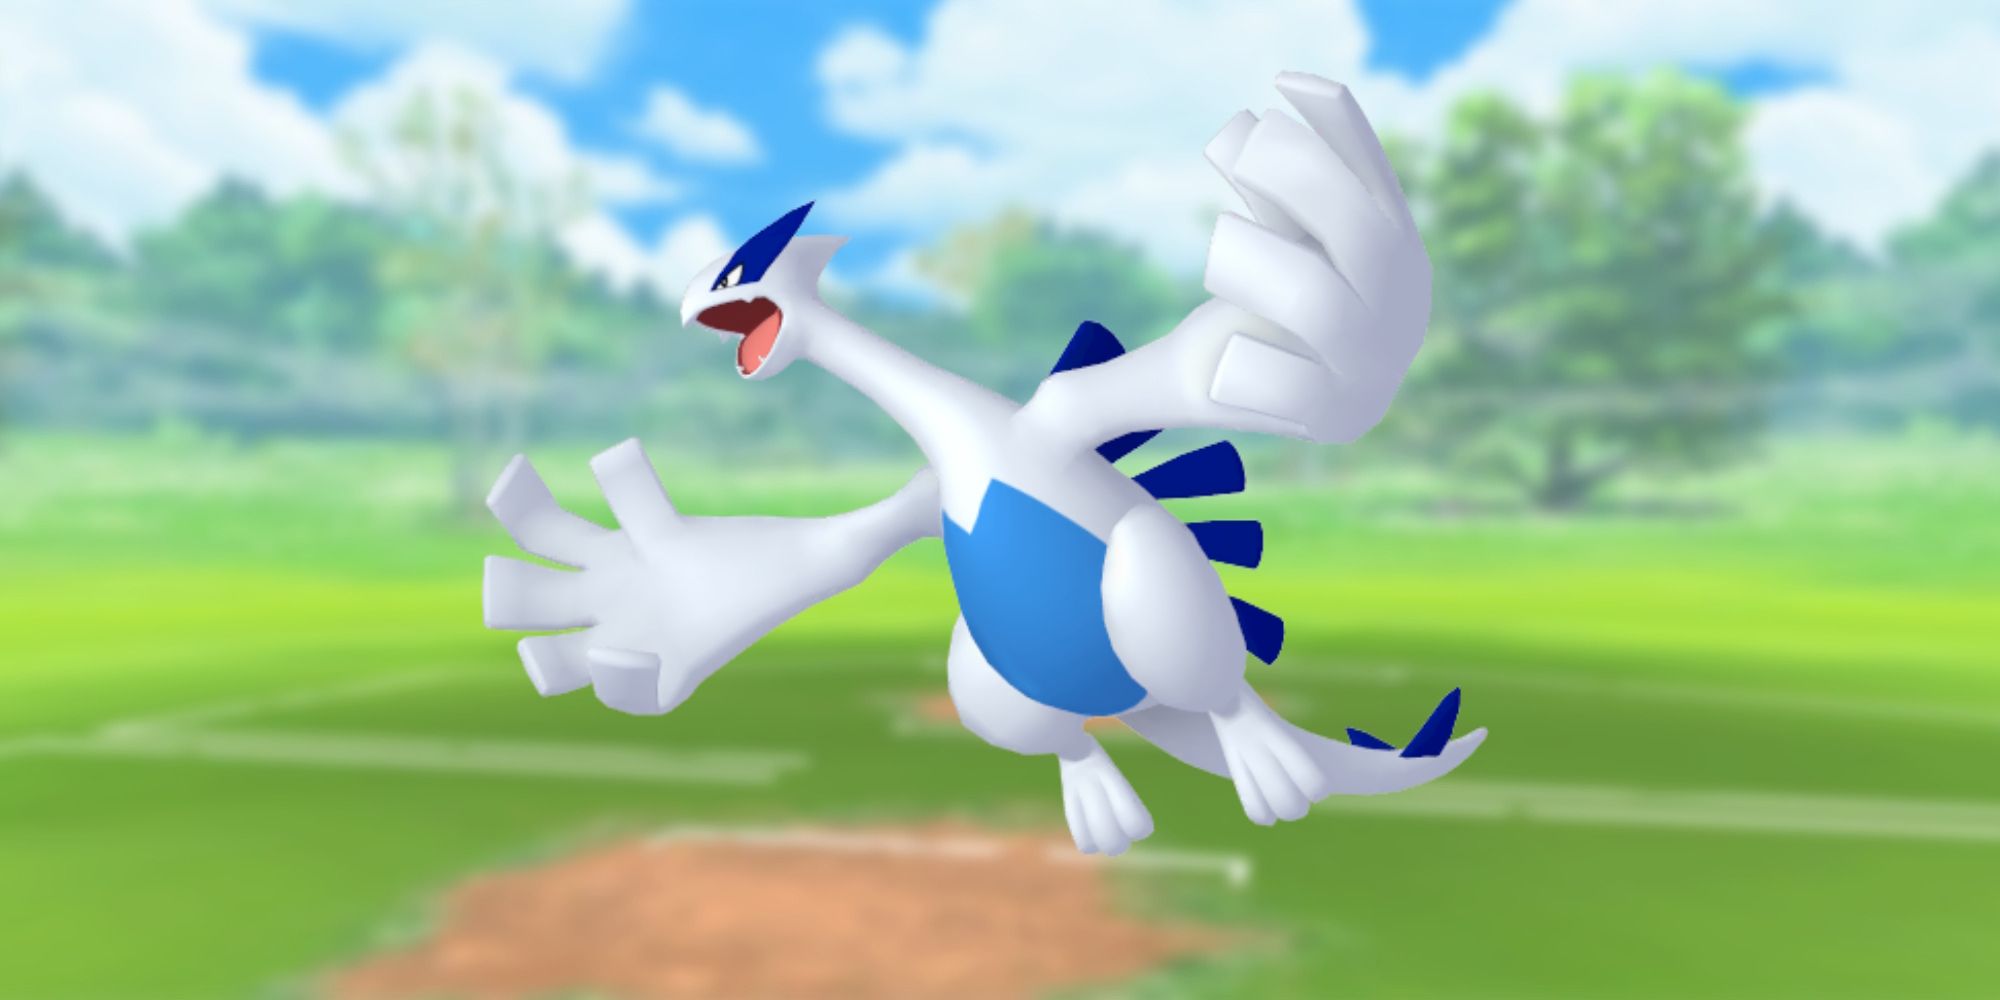 Lugia from Pokemon with the Pokemon Go battlefield as the background